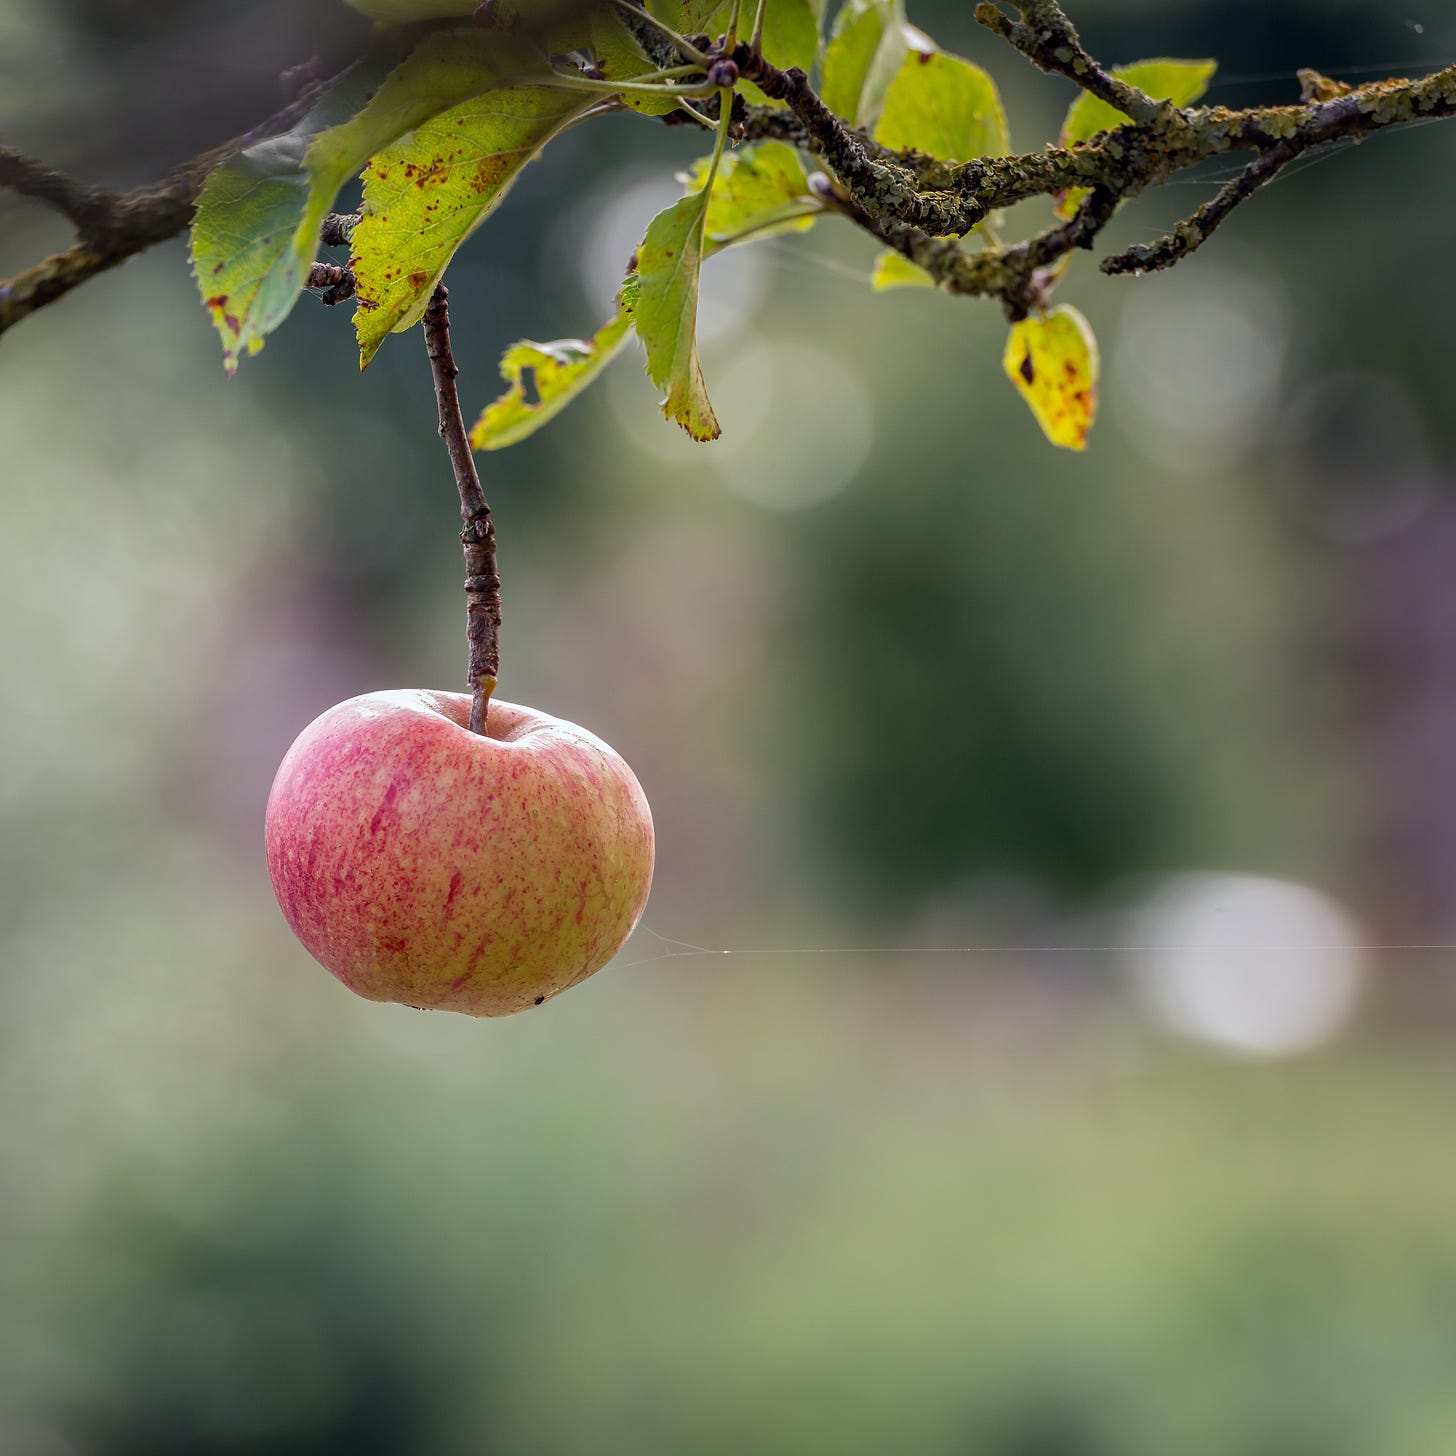 A single apple dangling from a branch.